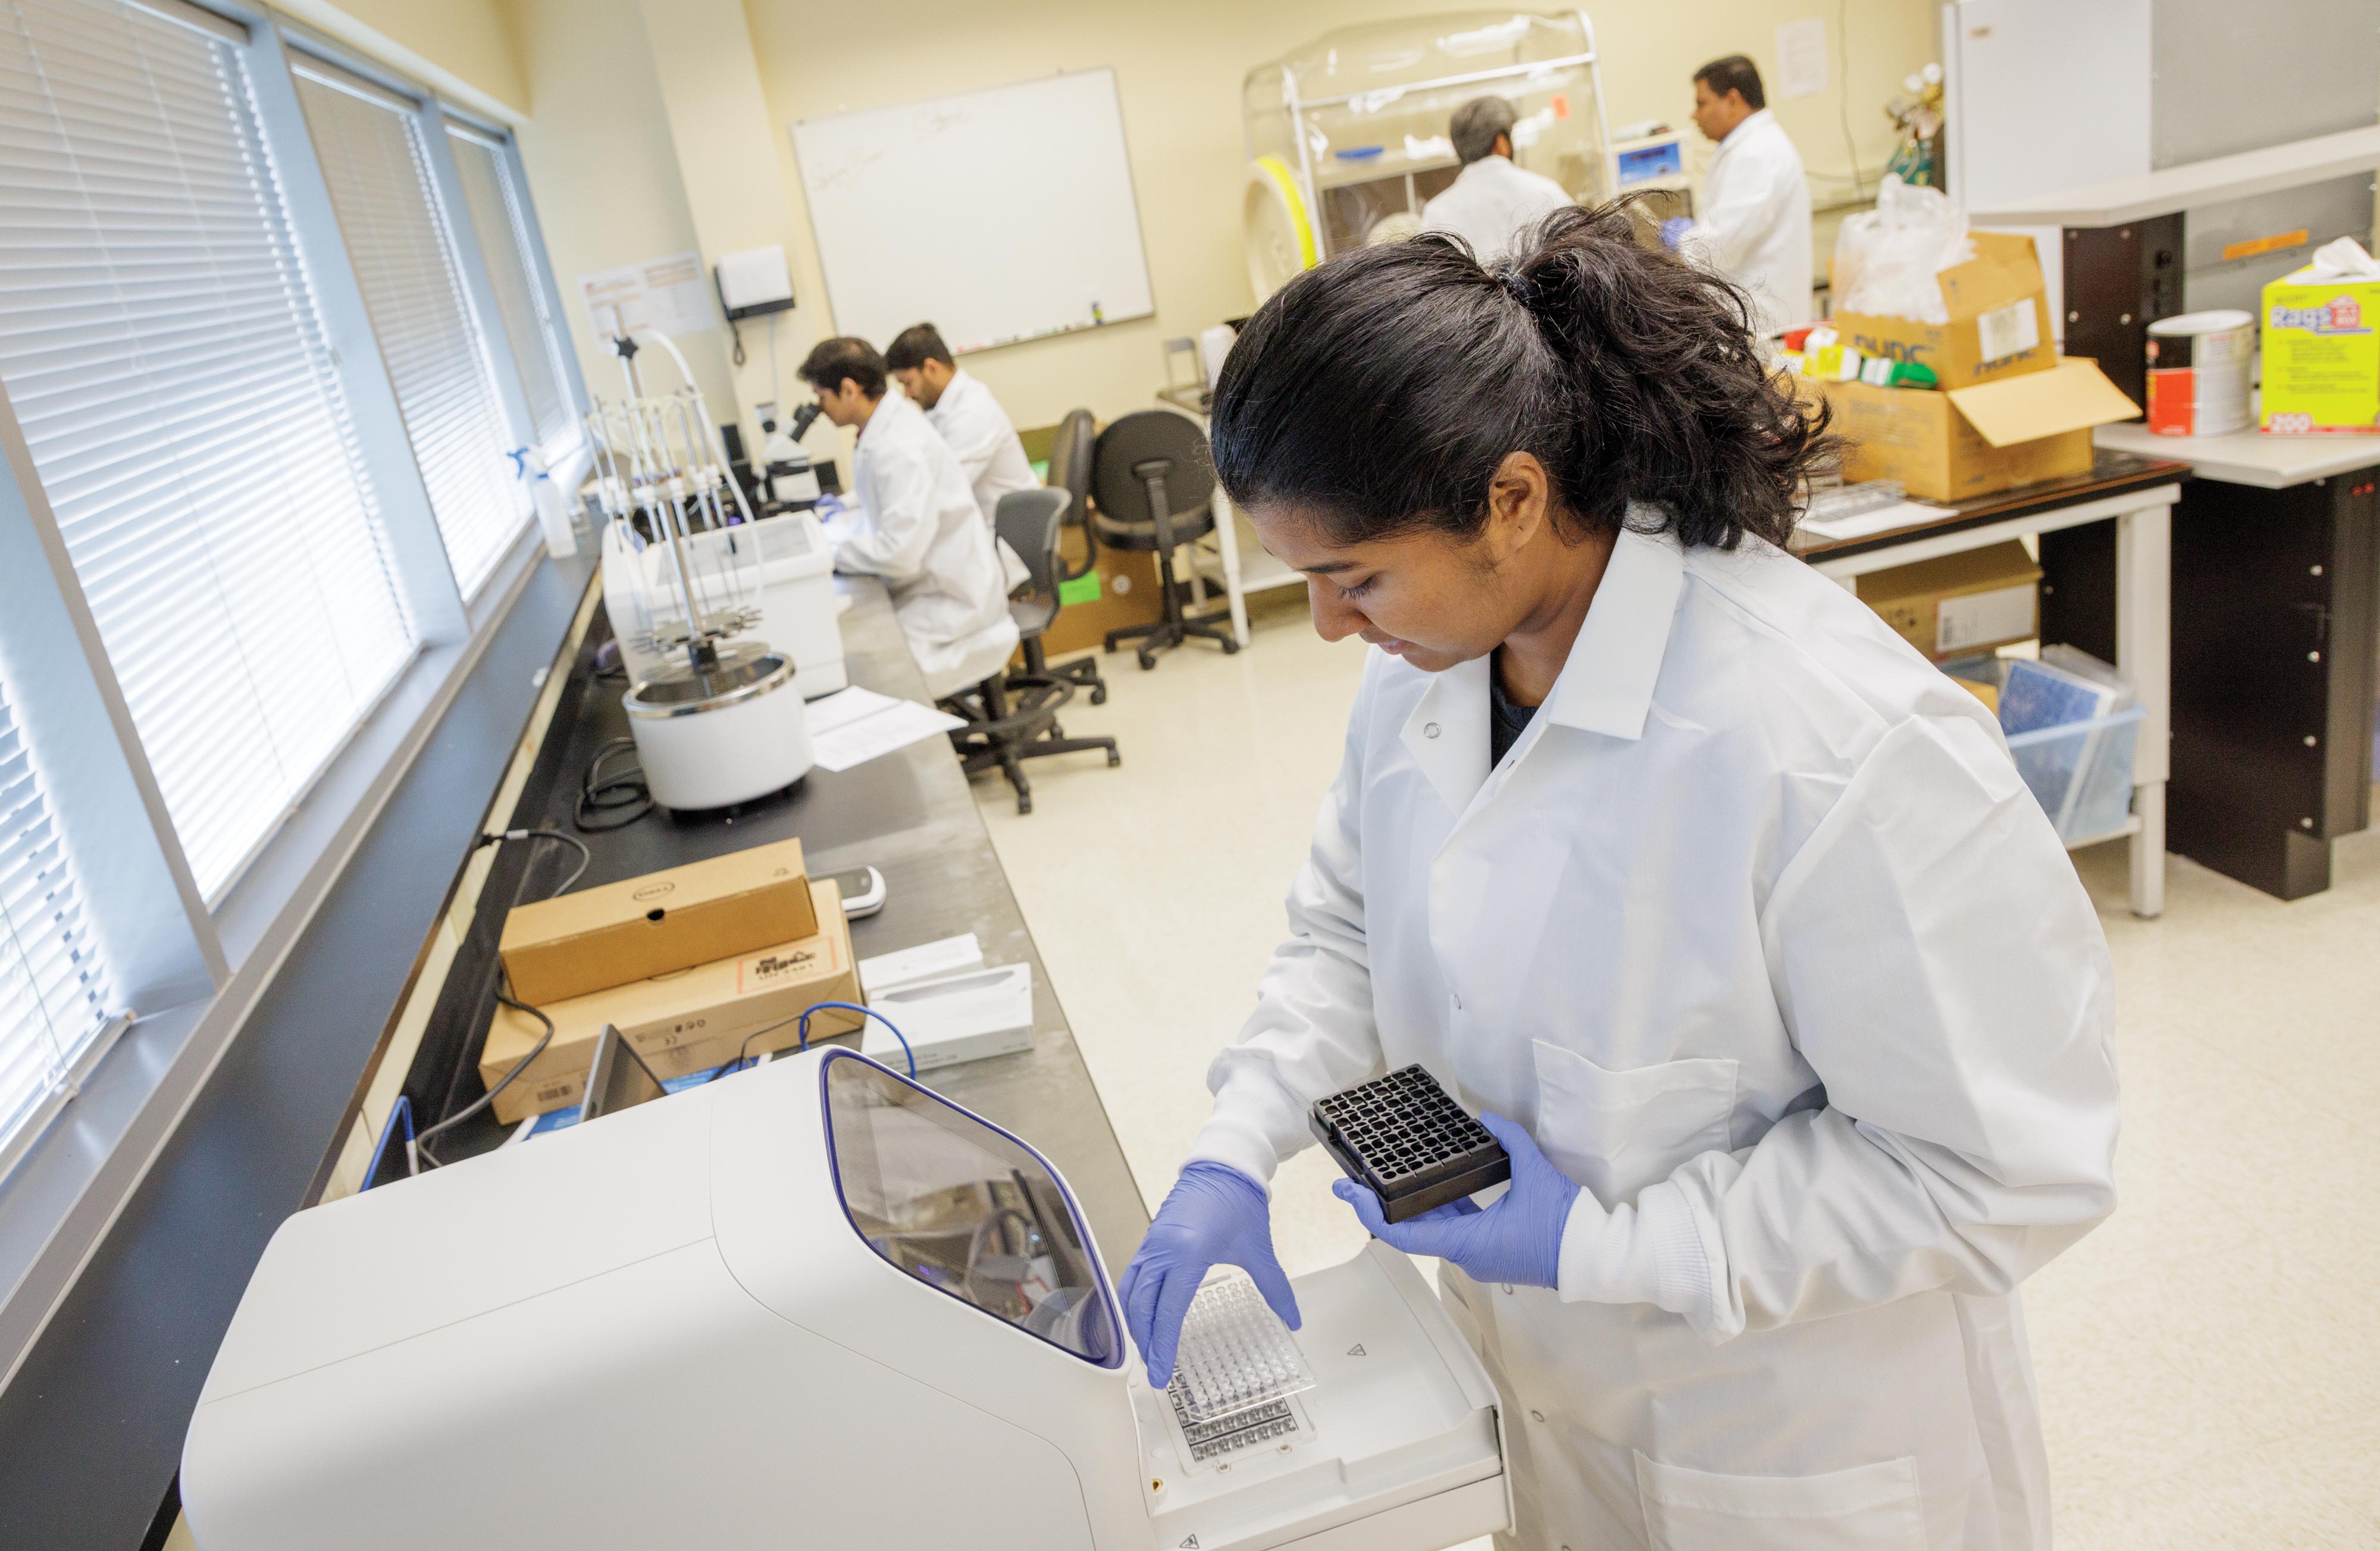 Binta Varghese, right, works in the lab at Venture One.